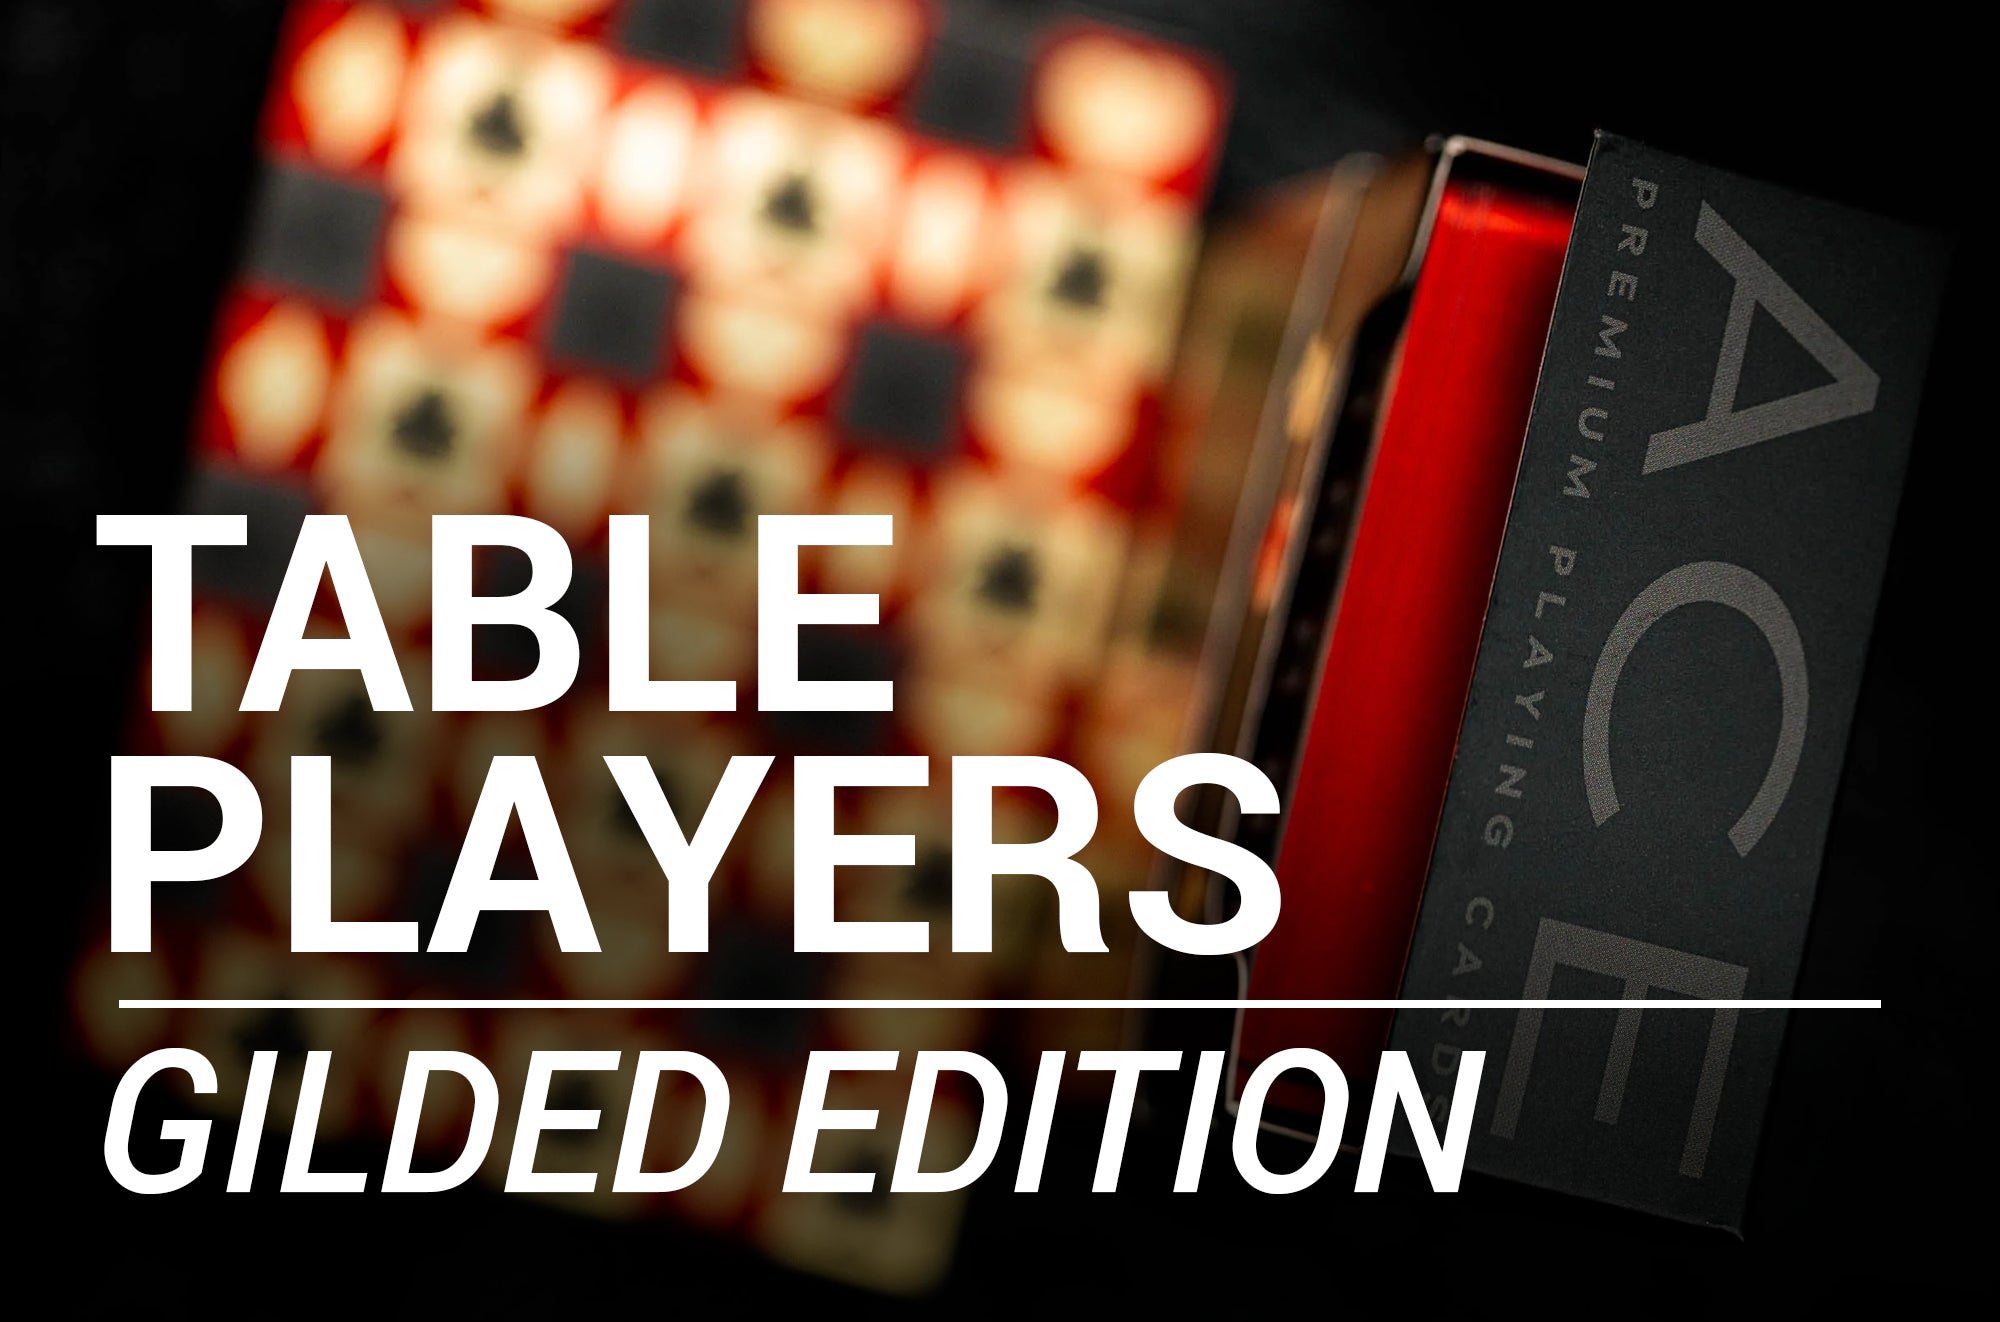 Gilded Edition - Table Players